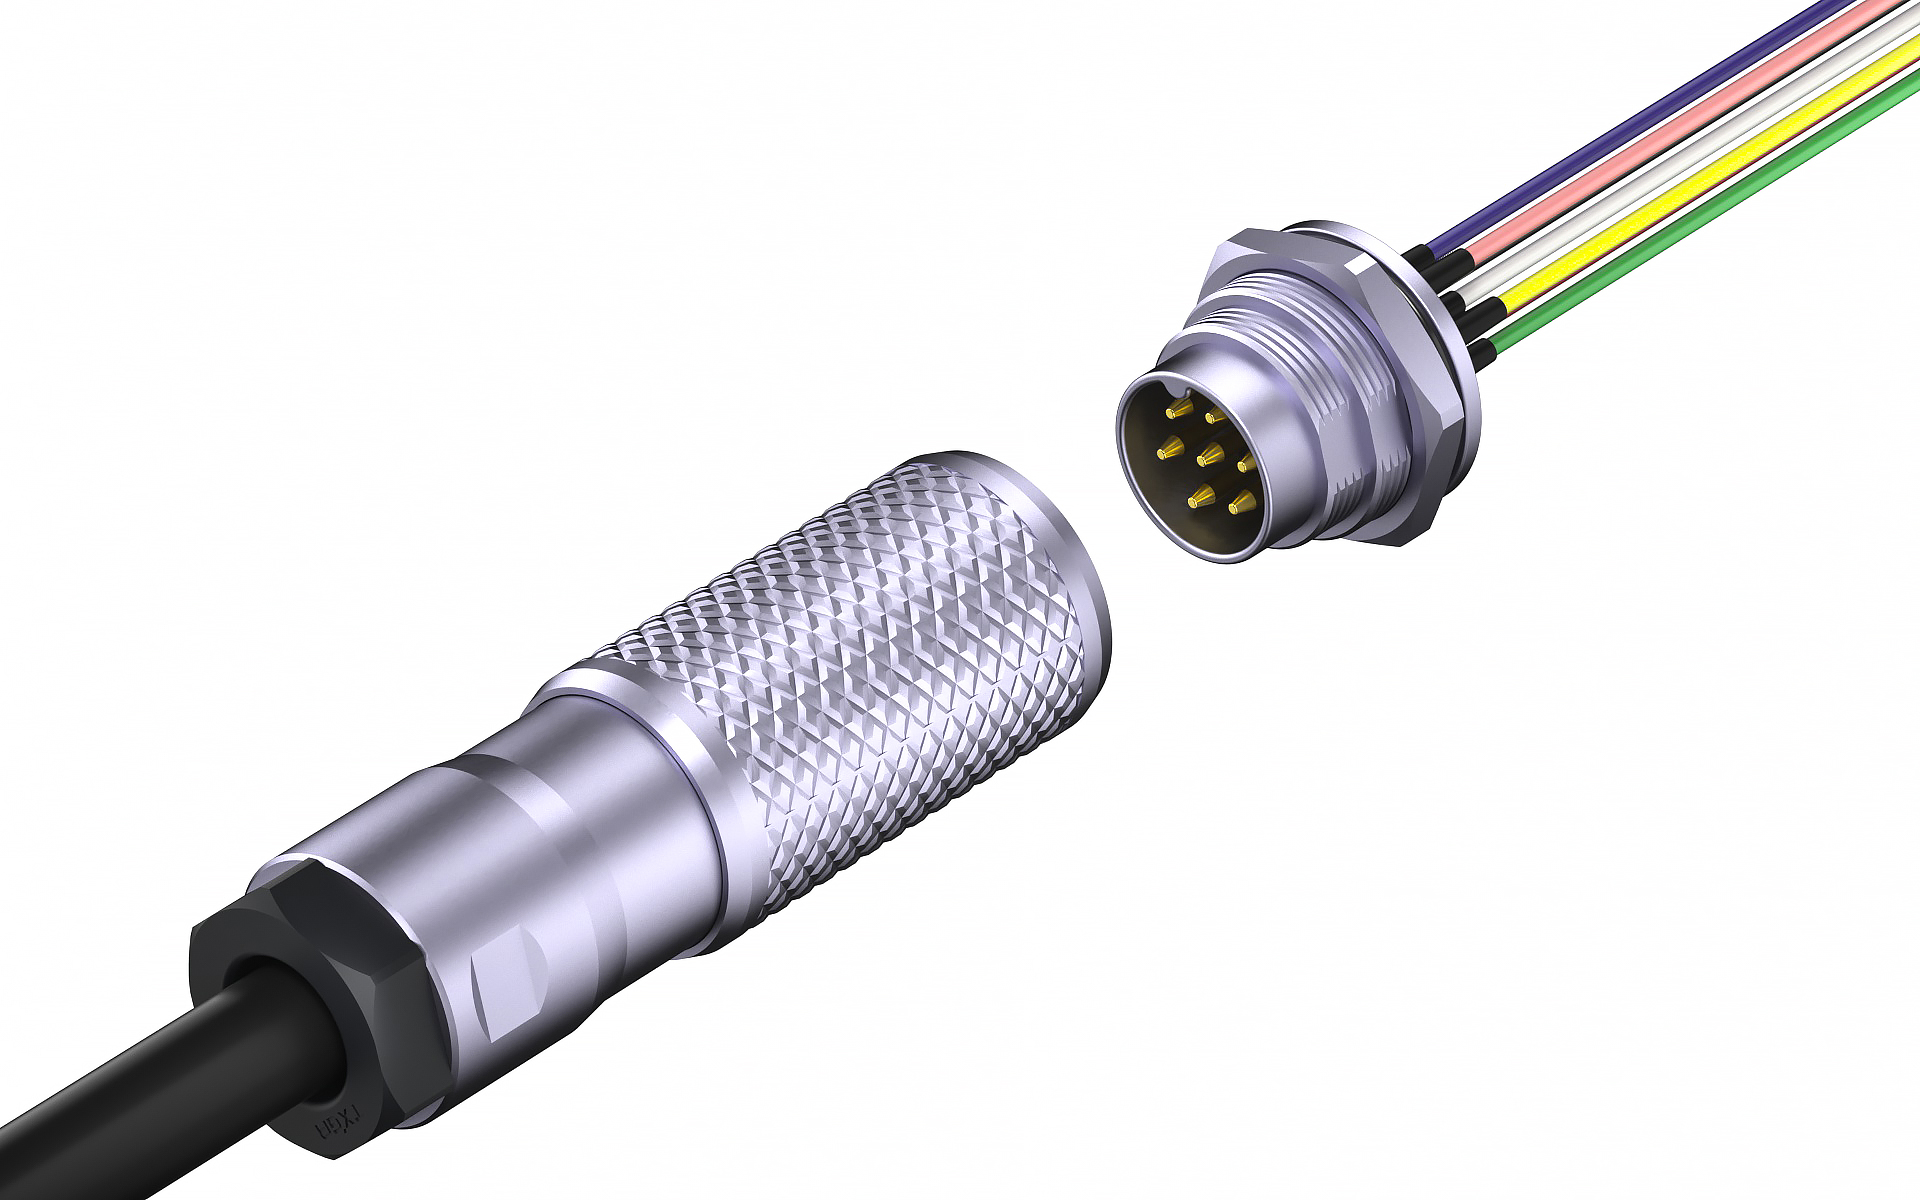 TXGA is a professional connector manufacturer that provides free selection guidance services to help you choose connector products with 